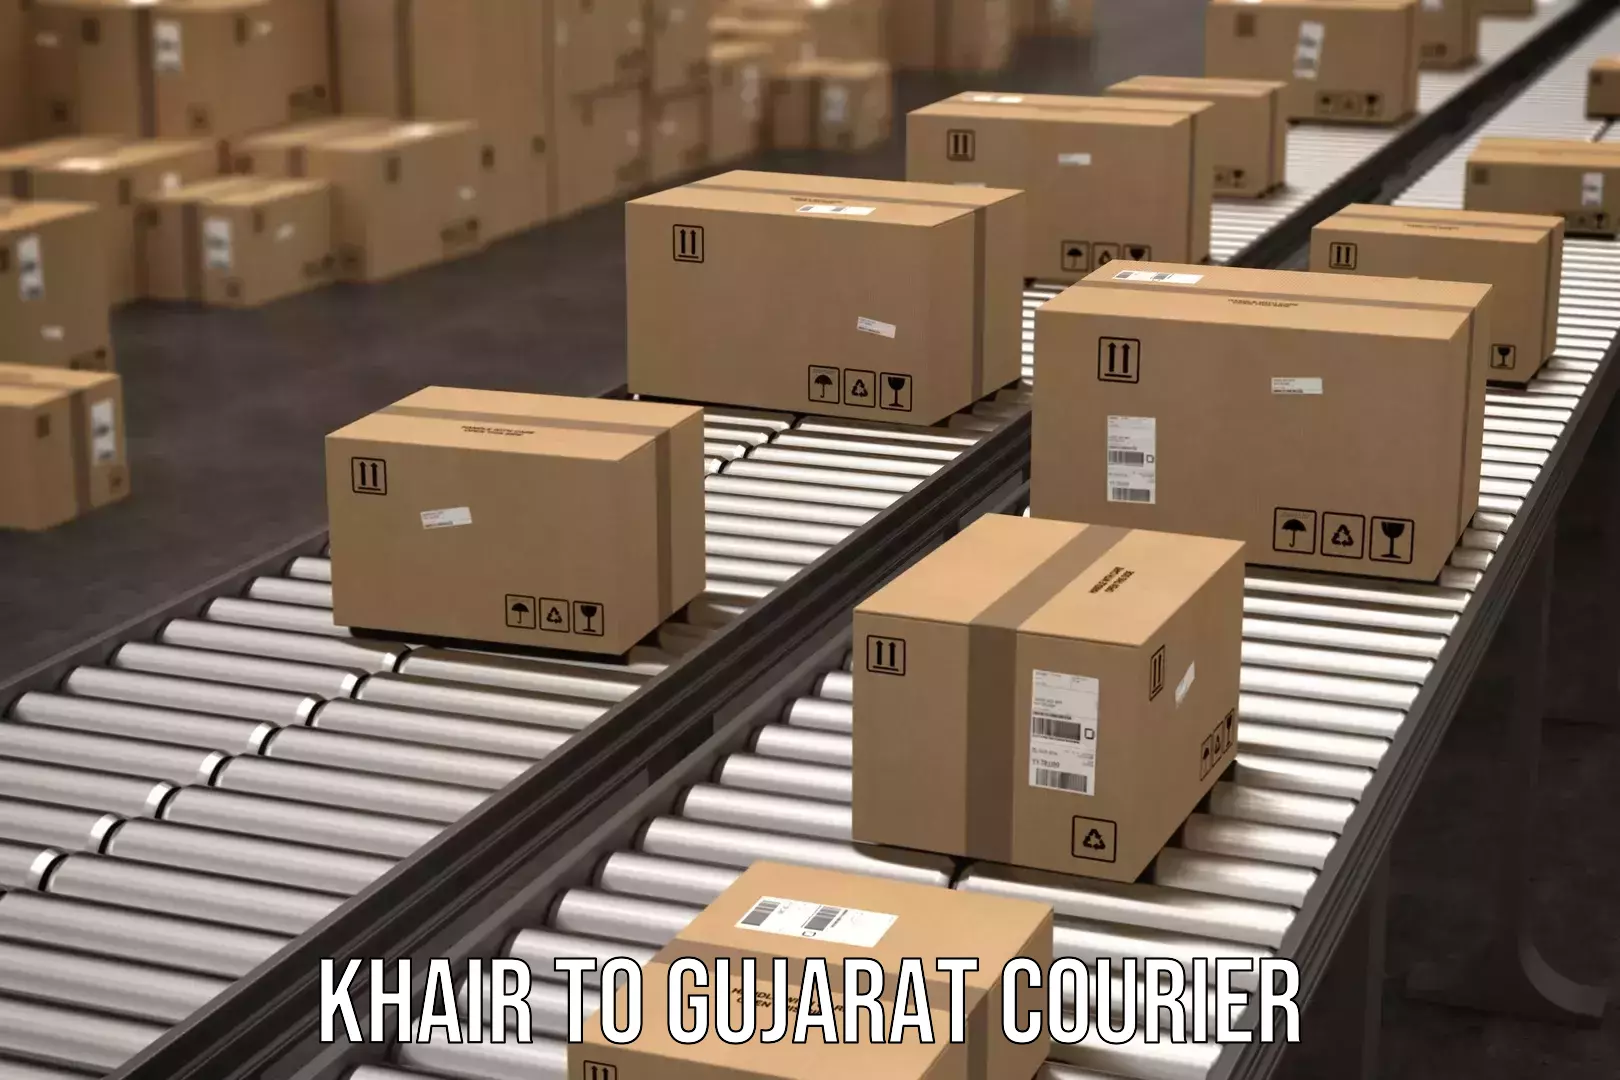 24-hour courier service Khair to Bhuj